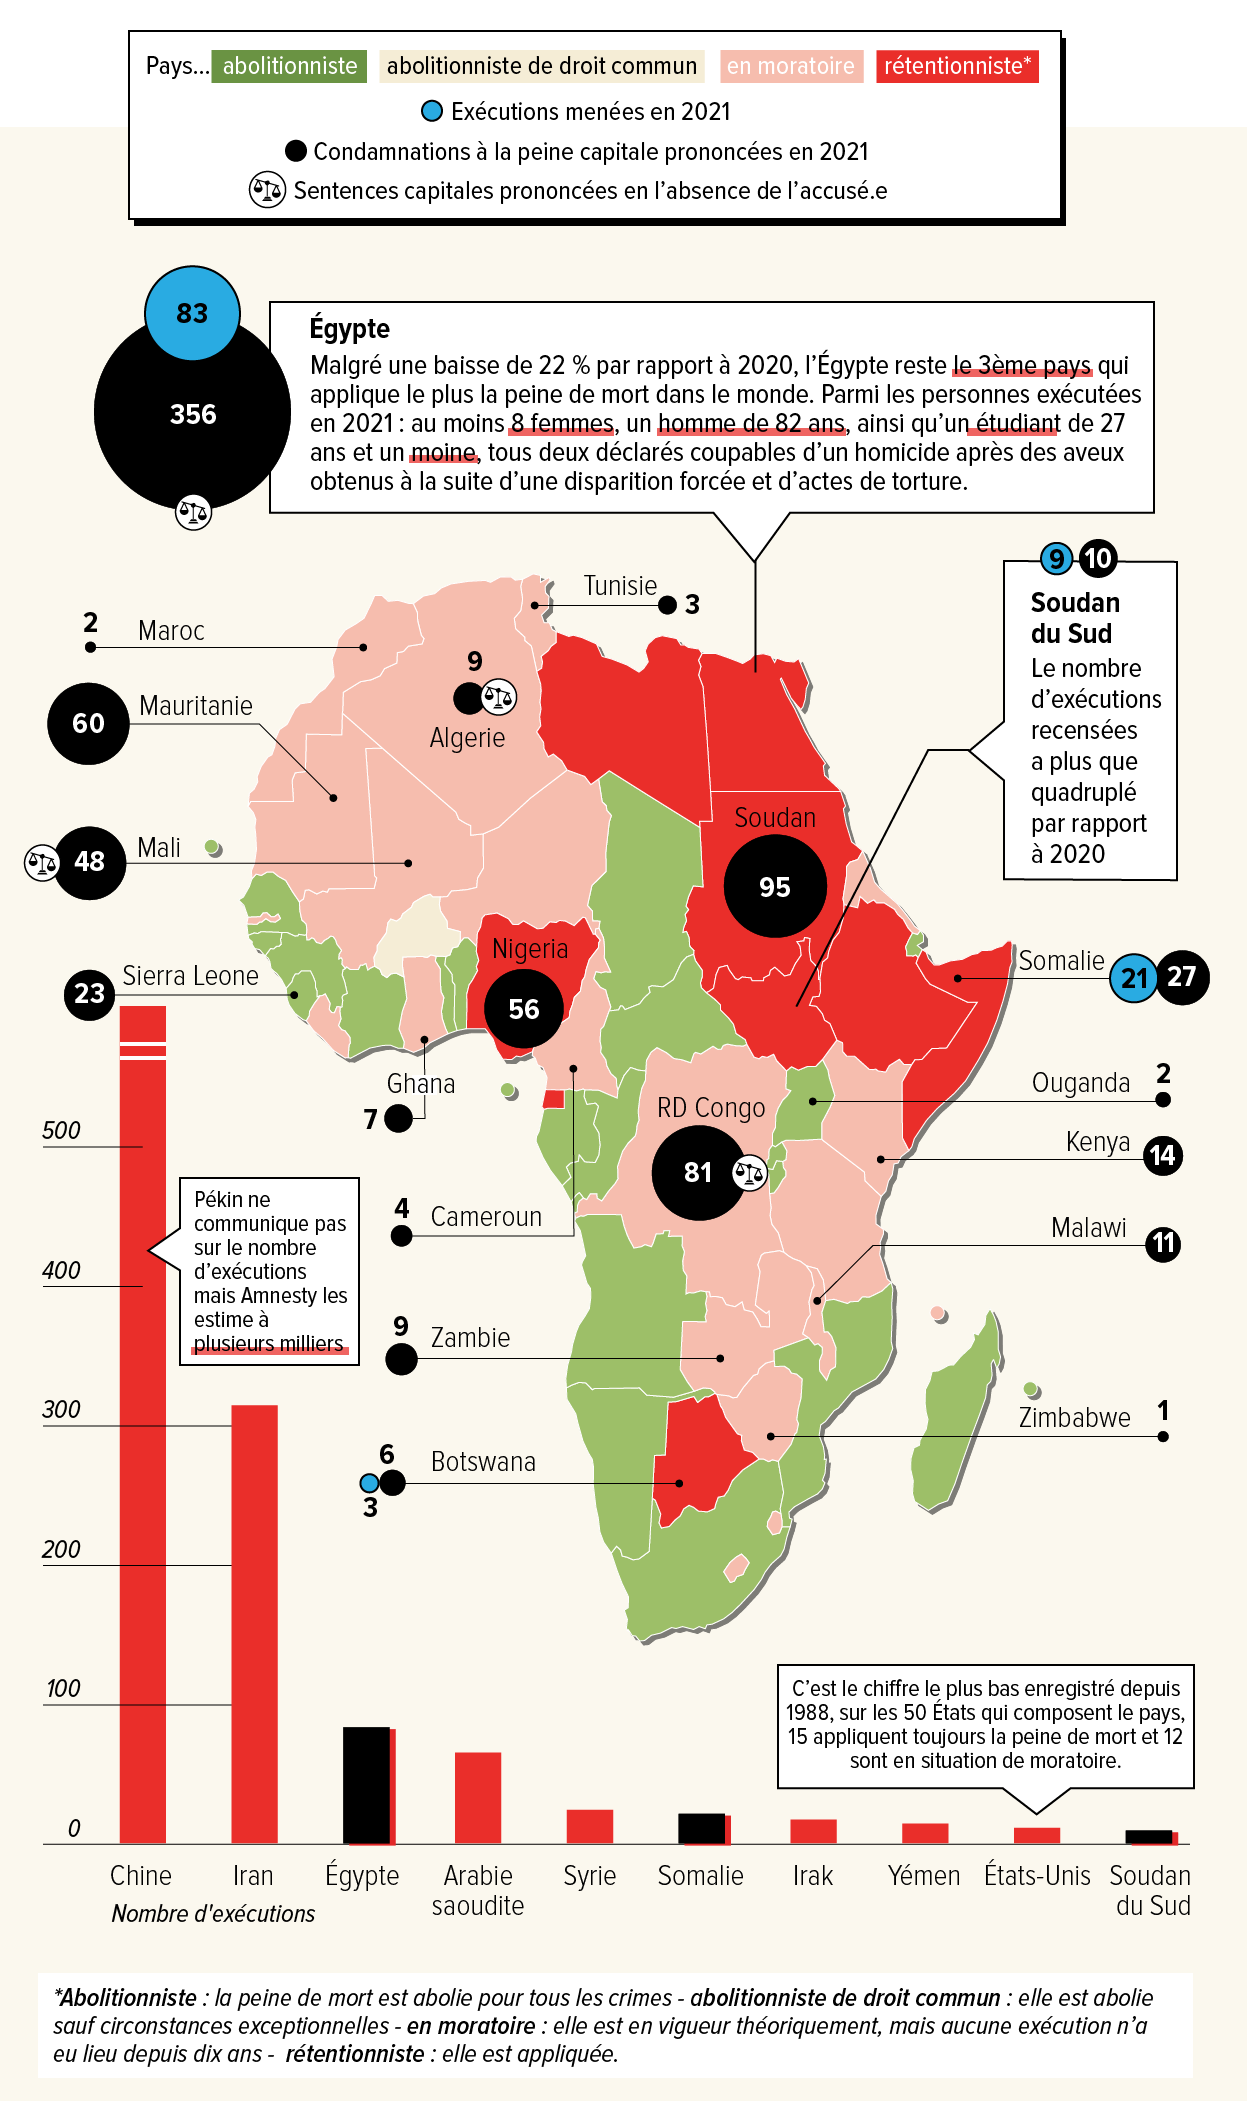 A map showing that most African countries have either abolished or put a moratorium on the death penalty, with the remaining countries still using executions mostly found in northeast Africa and Nigeria